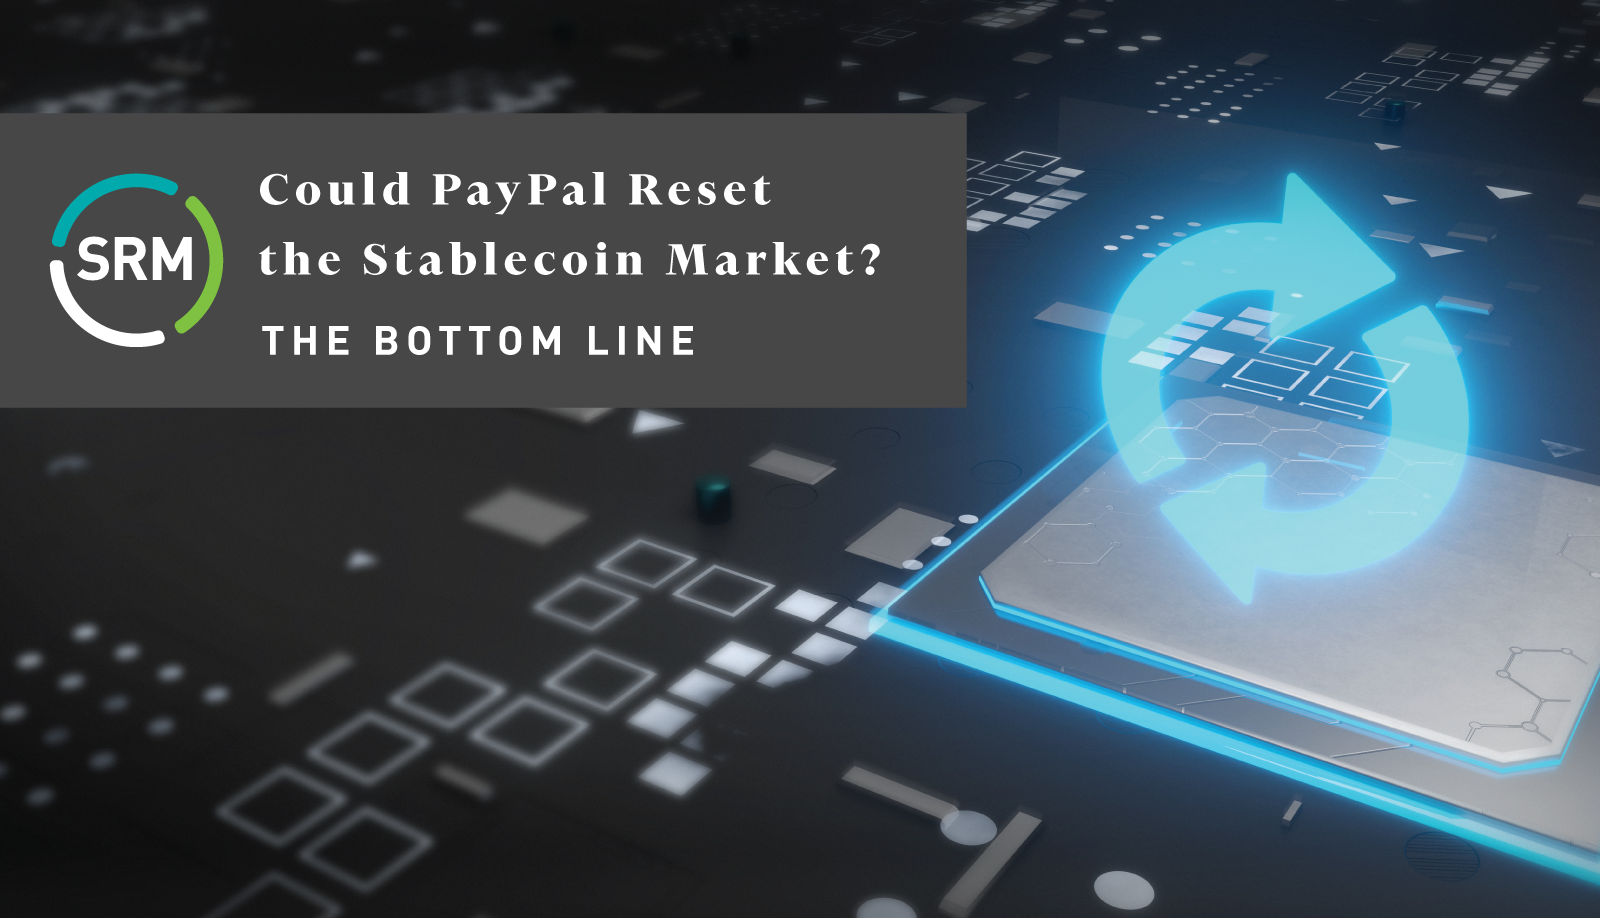 PayPal-Stablecoin-Blog-Image